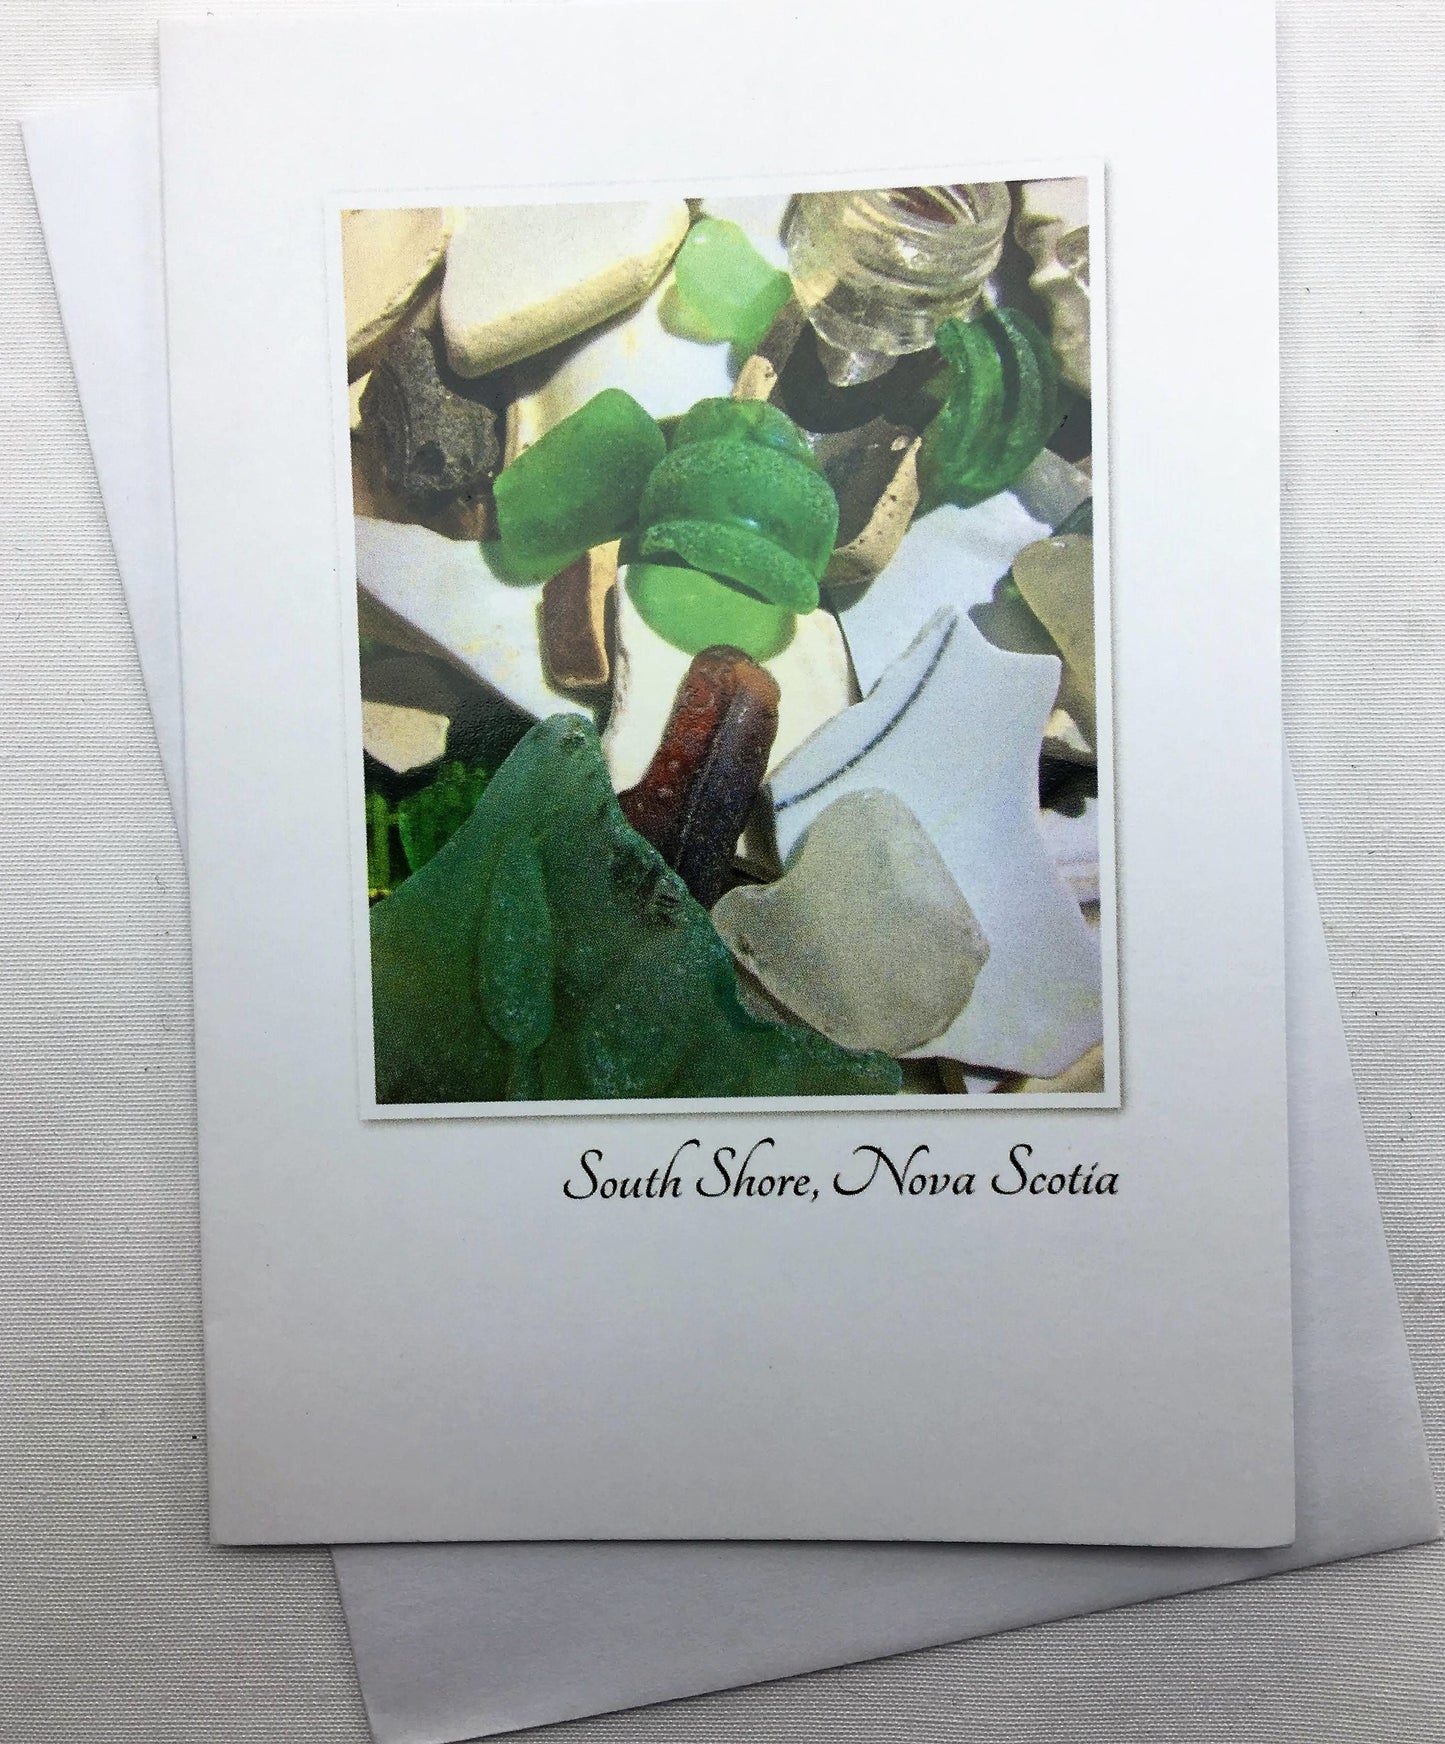 Set of 2 Note Cards - Nova Scotia Sea Glass Collections (includes envelopes)